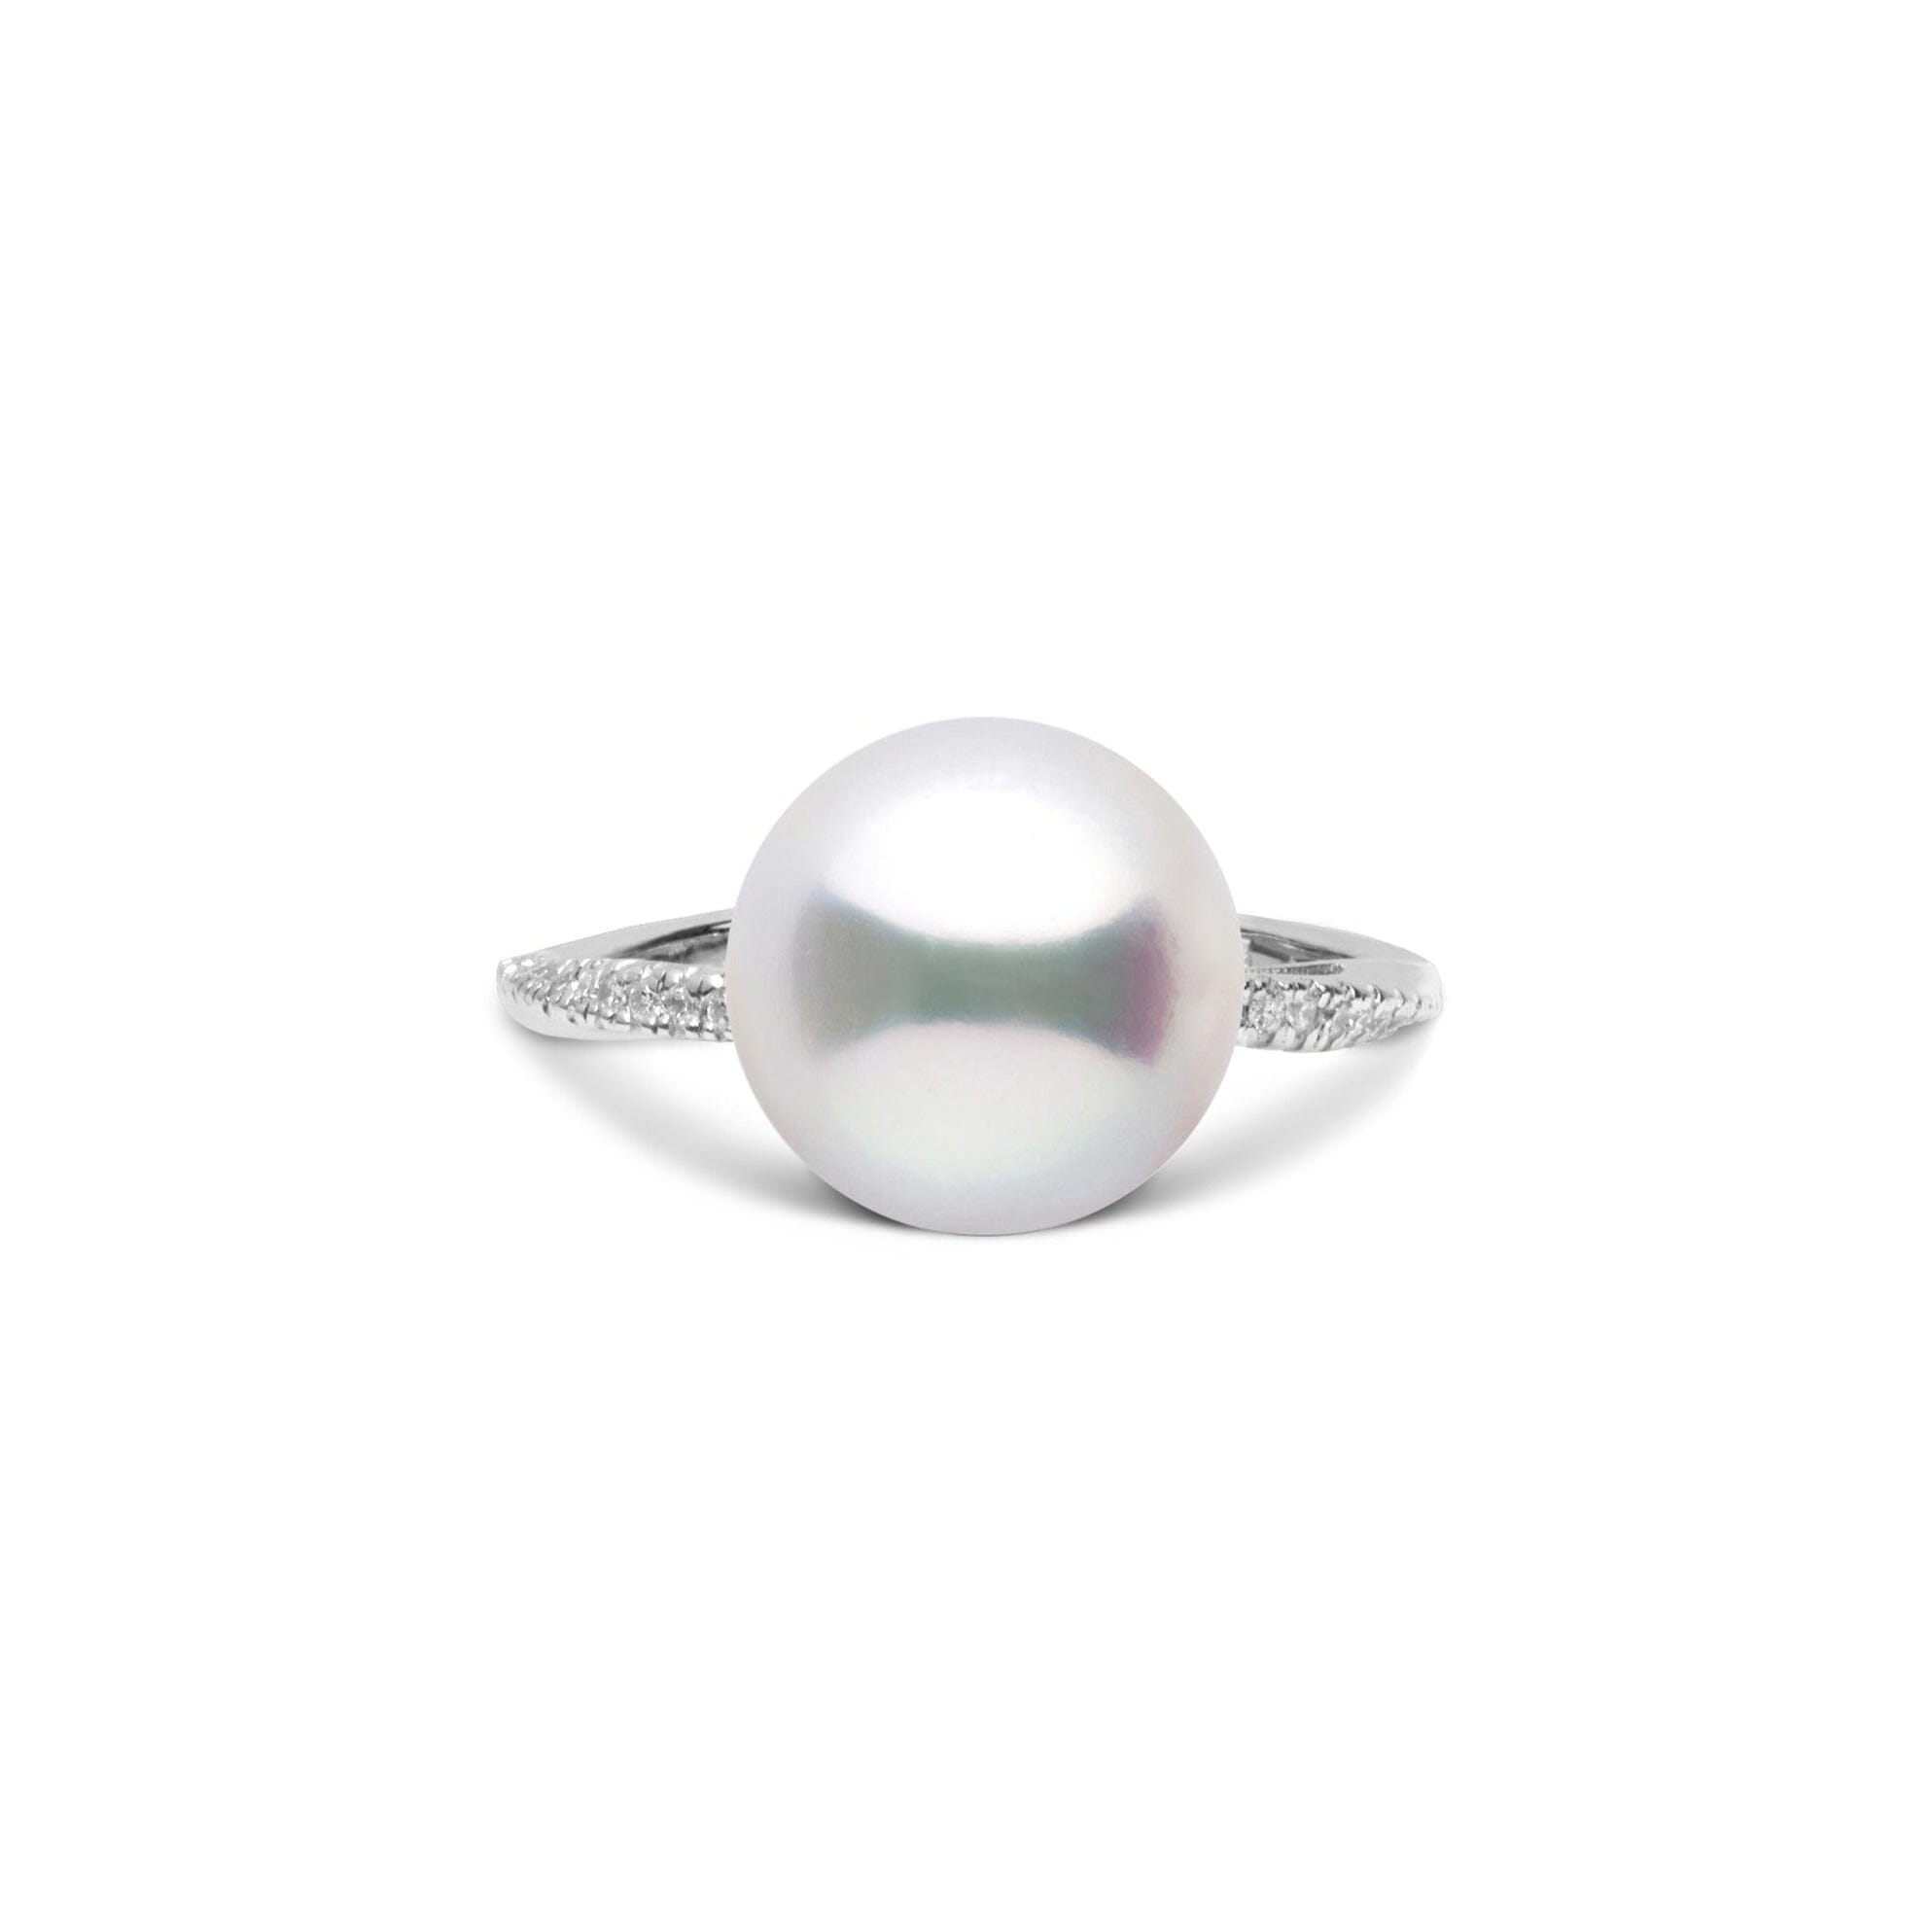 Pirouette Collection 10.0-11.0 mm White South Sea Pearl and Diamond Ring front